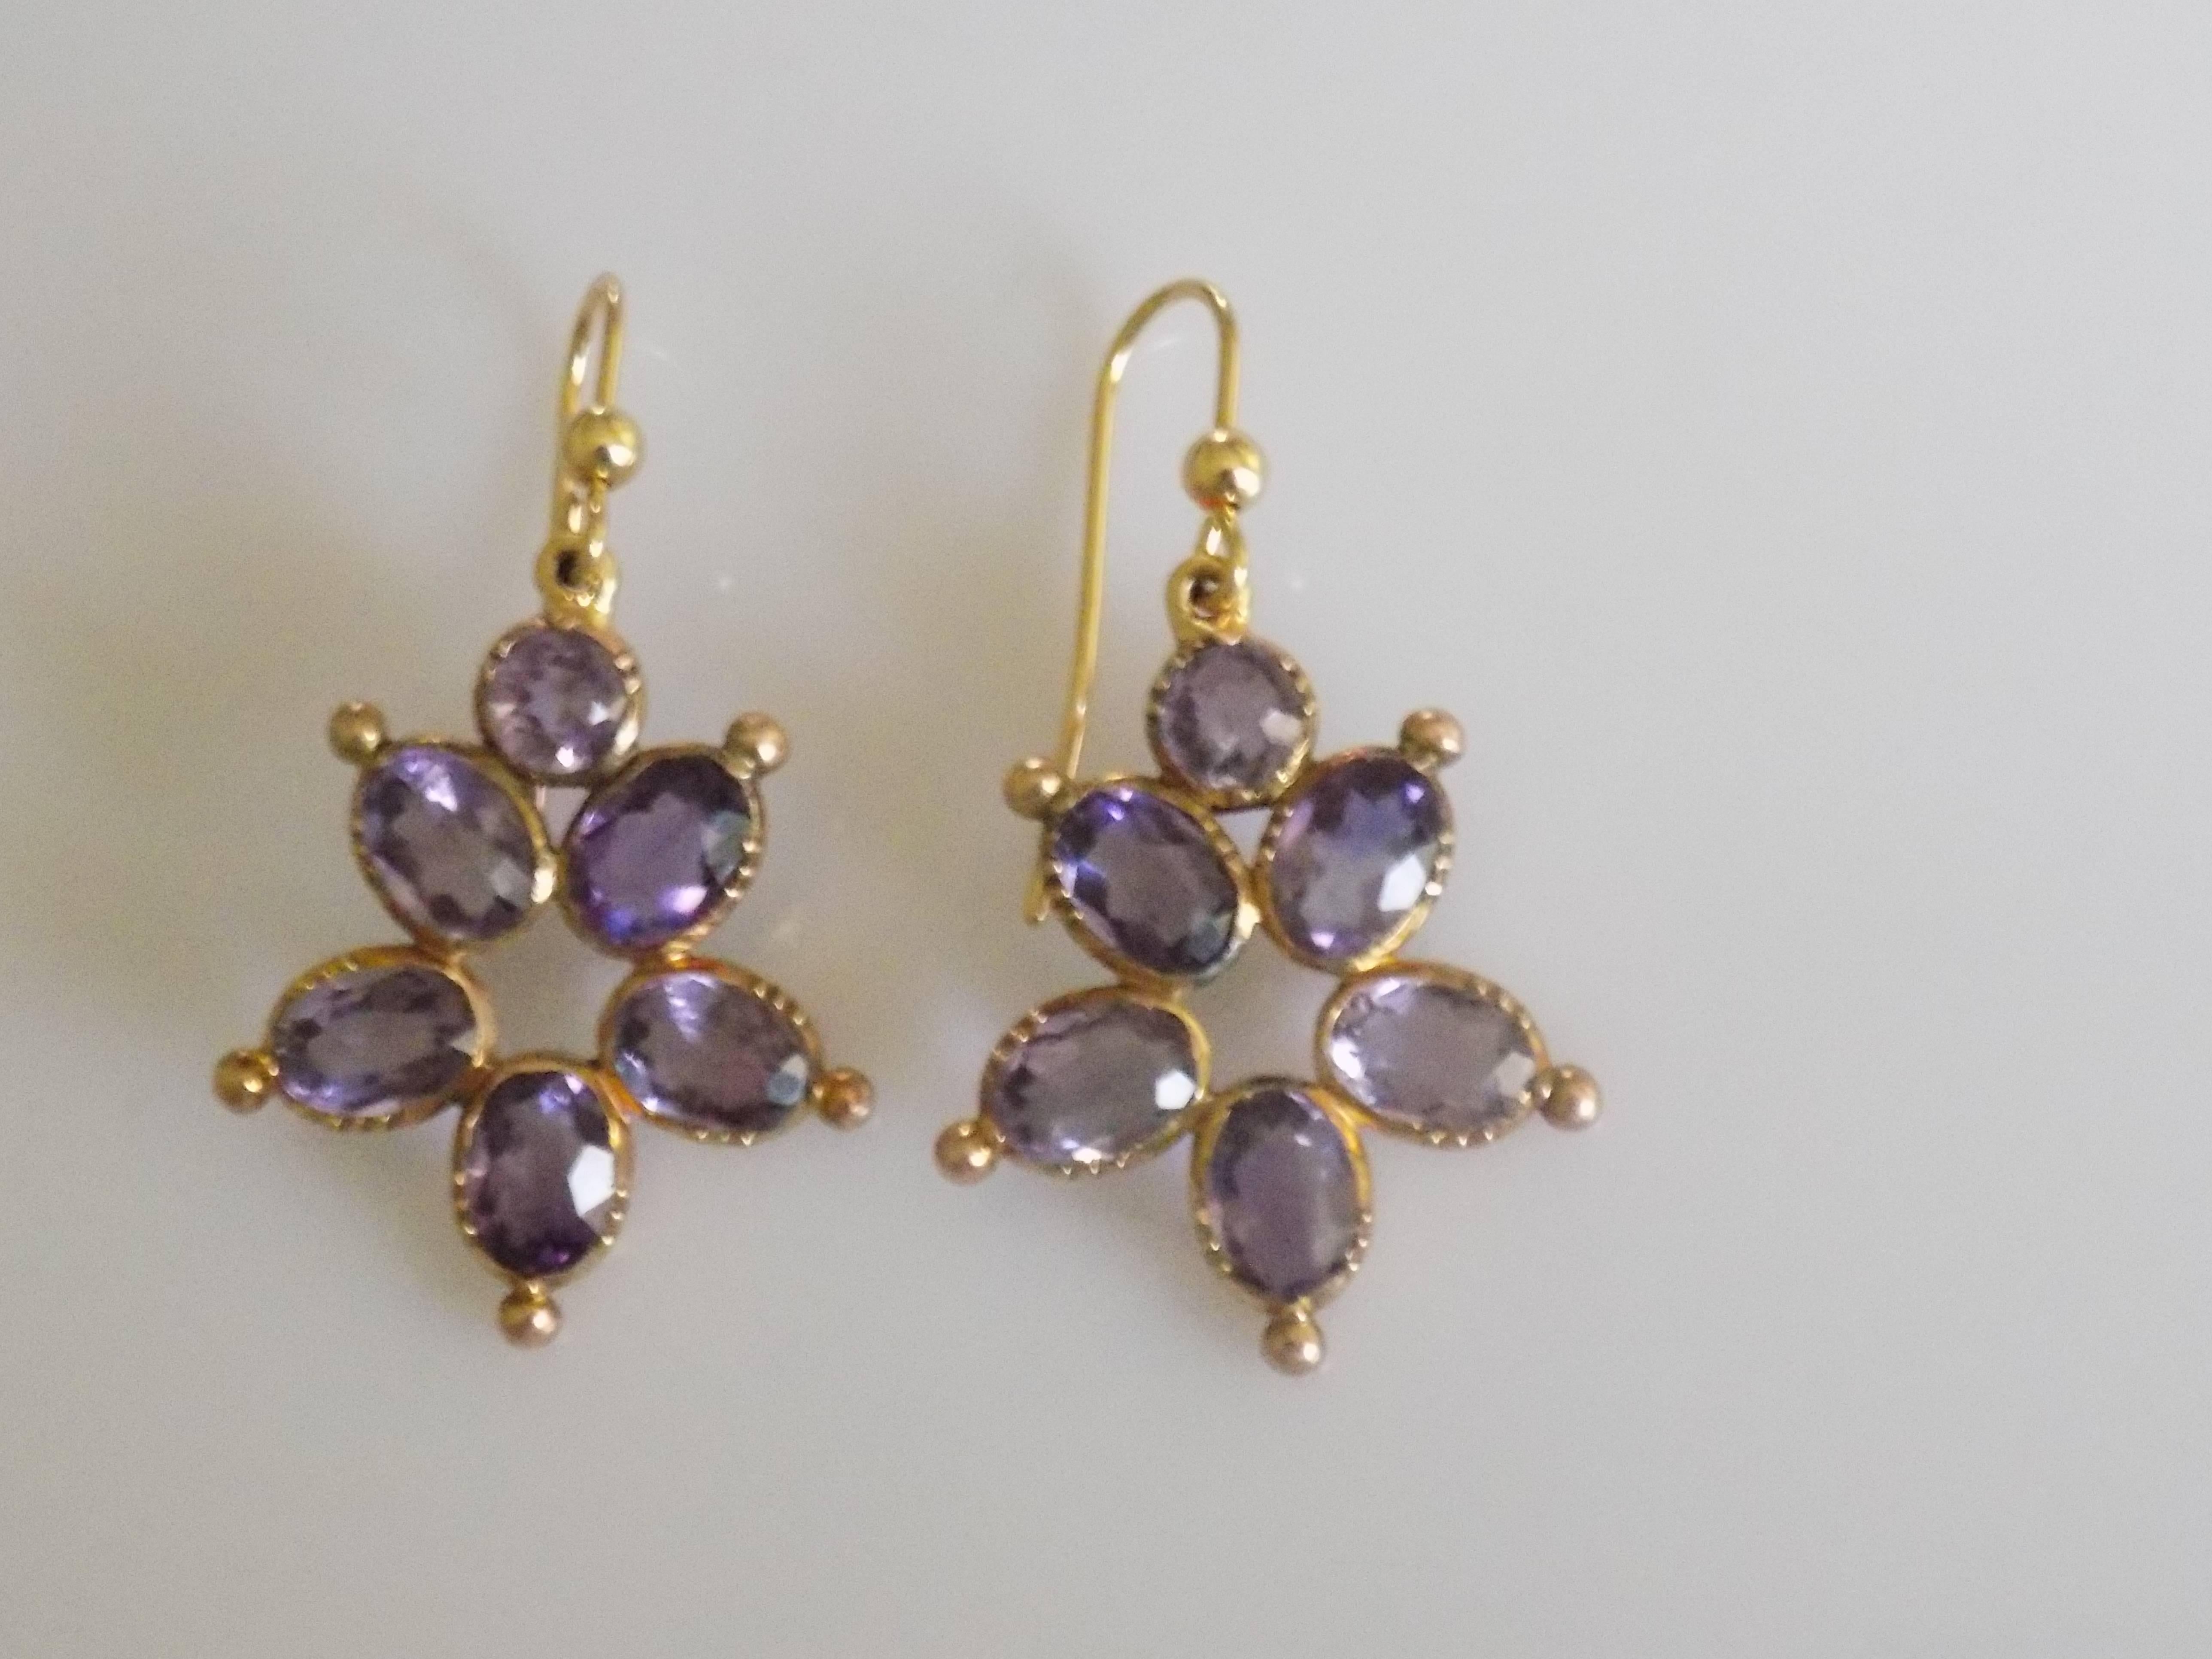 An Impressive Antique Victorian 18 Karat Gold and Amethyst drop earrings. The earrings complete with a brand new hook wires for pierced ears.
Total drop including hooks 38mm, width 22mm.
Weight 6.7gr.
Earrings unmarked, tested for 18 Karat Gold.